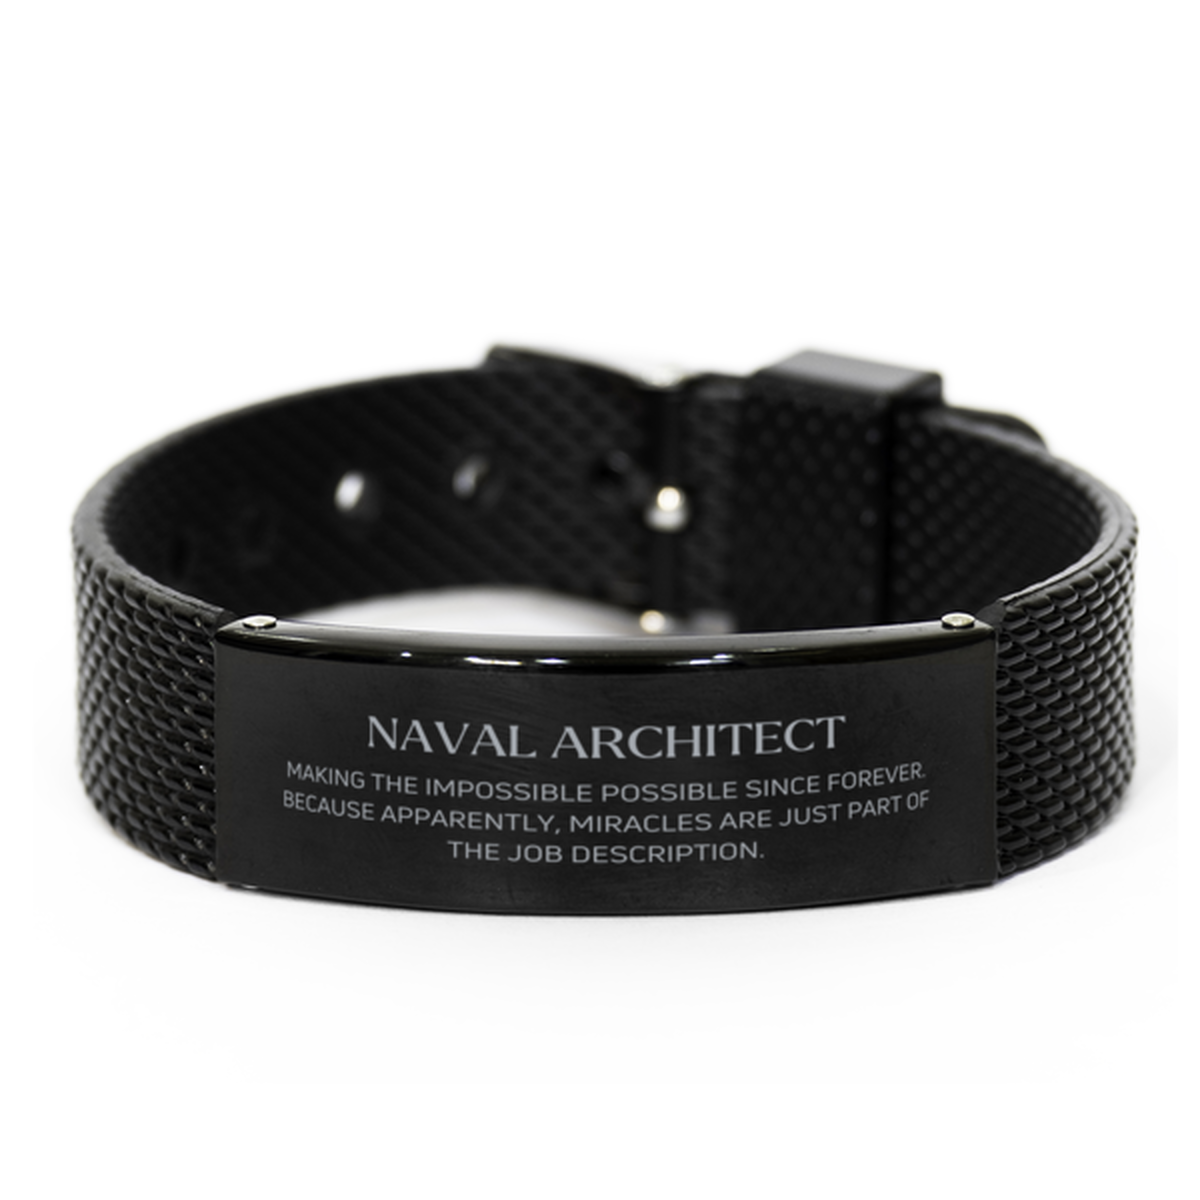 Funny Naval Architect Gifts, Miracles are just part of the job description, Inspirational Birthday Black Shark Mesh Bracelet For Naval Architect, Men, Women, Coworkers, Friends, Boss